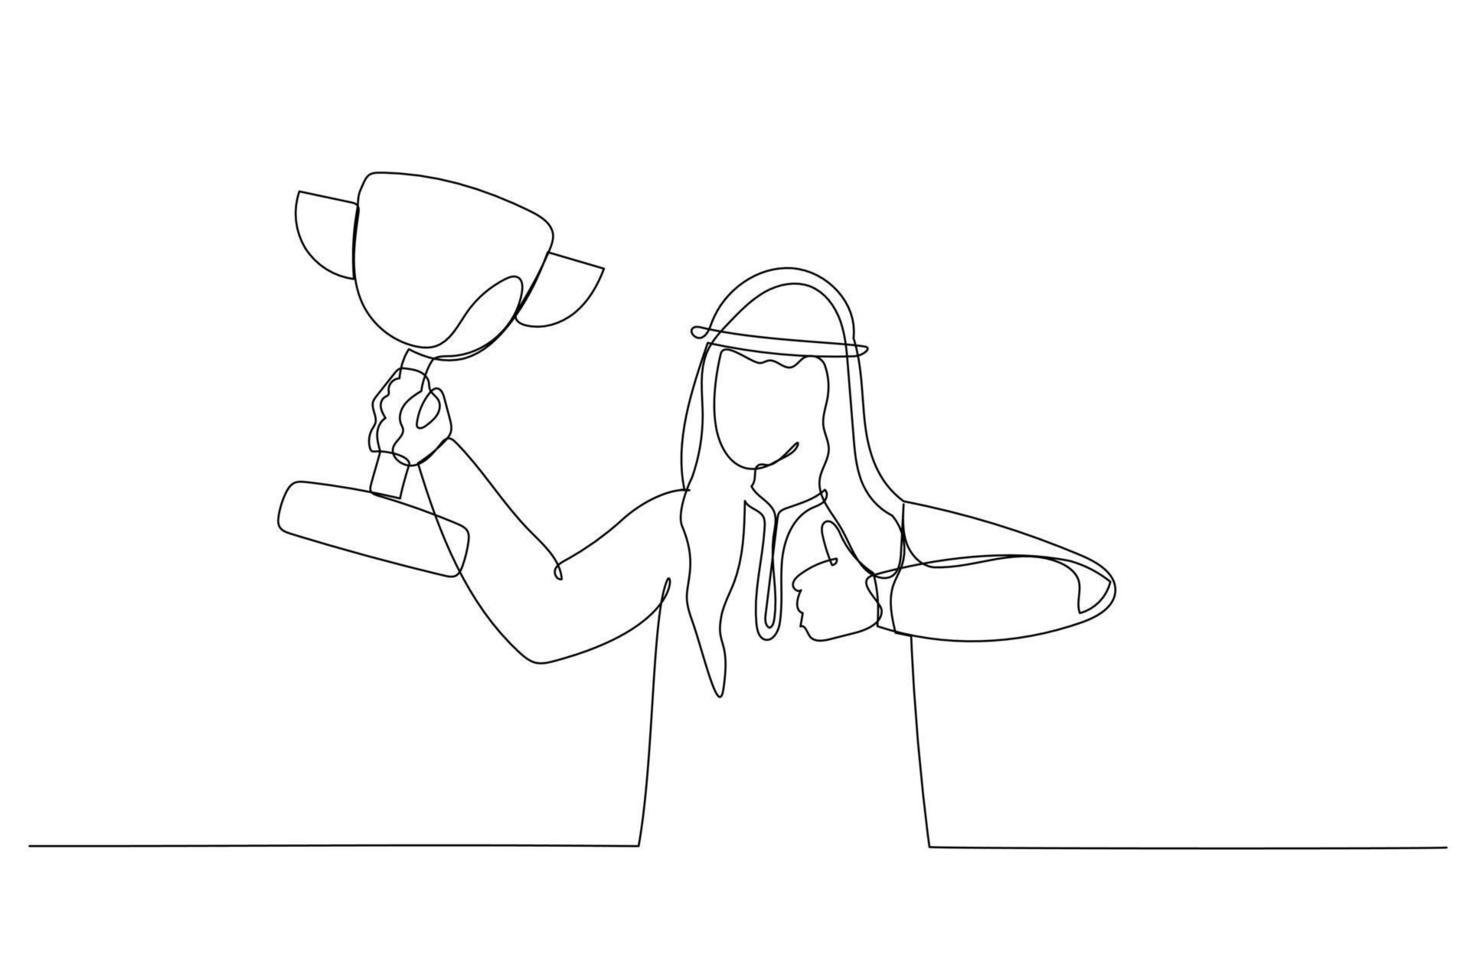 Illustration of arab businessman champion get award prize celebrating archievement. One continuous line art style vector